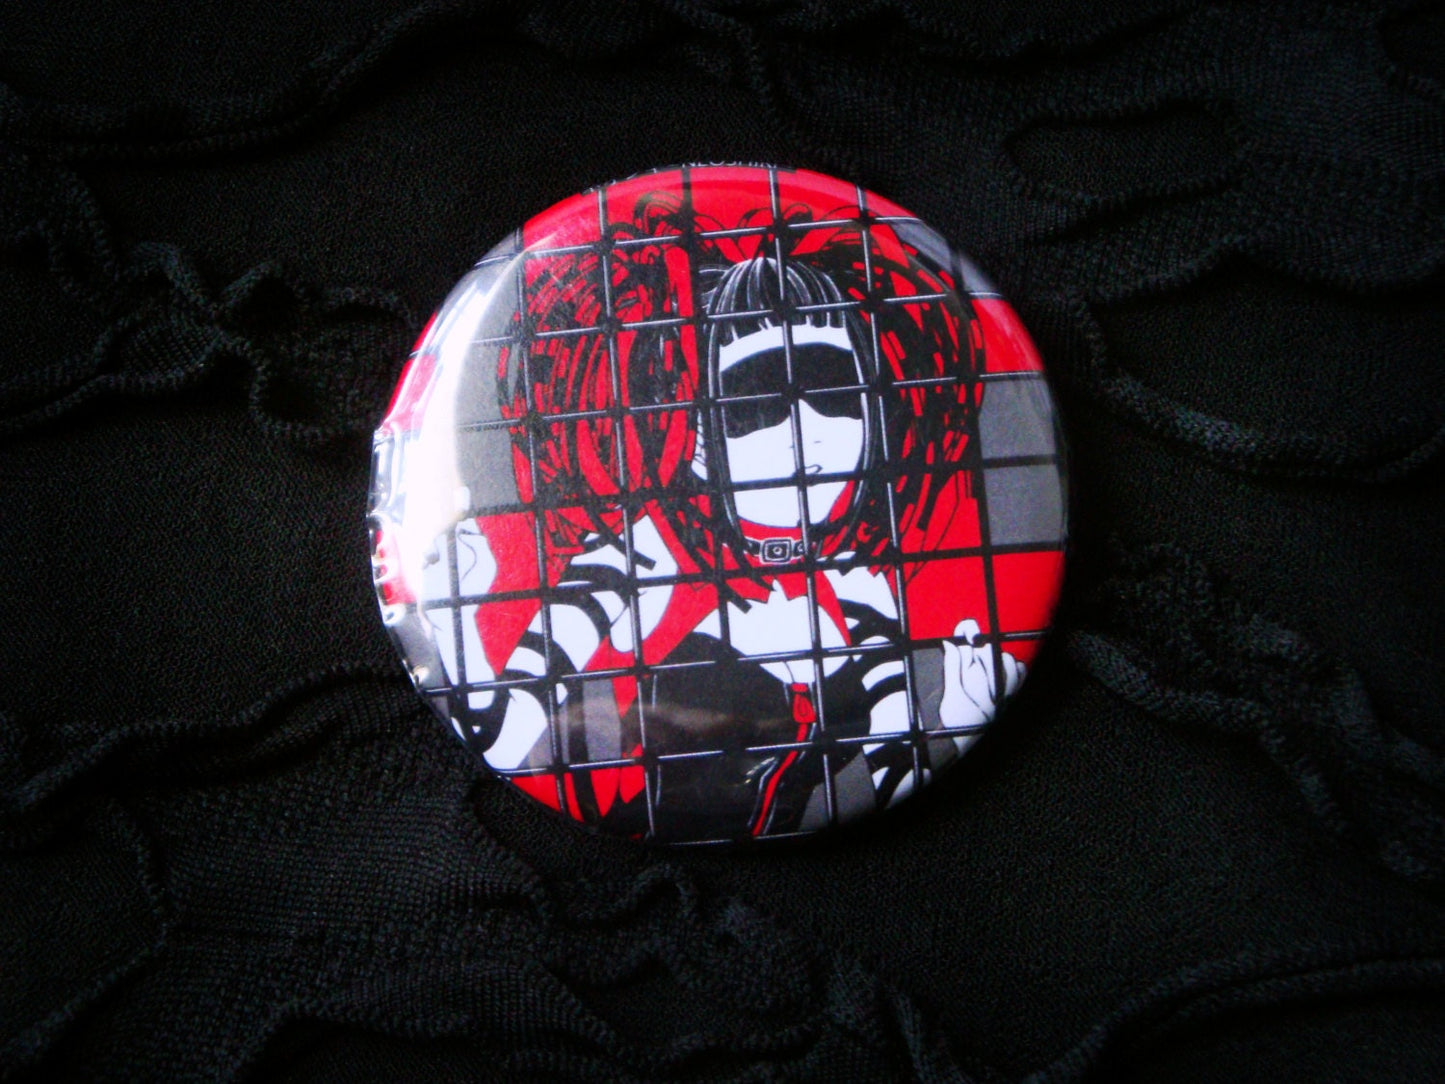 Goth Girl & Cage Industrial Button